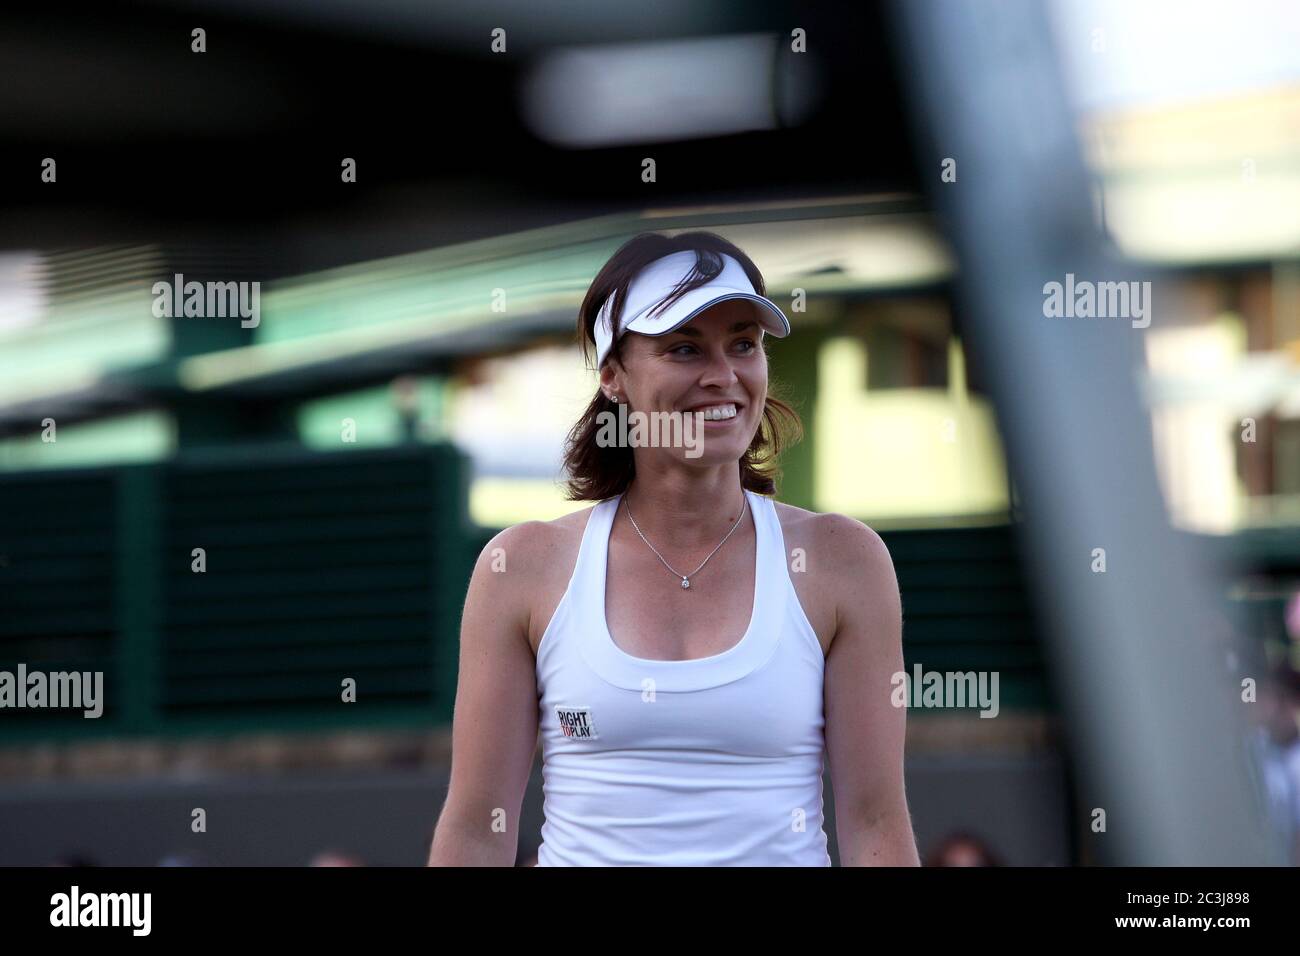 Martina Hingis walks to change sides in between games during the Ladies Invitational Doubles Competition at Wimbledon, 2010 at which she partnered with Anna Kournikouva. Stock Photo